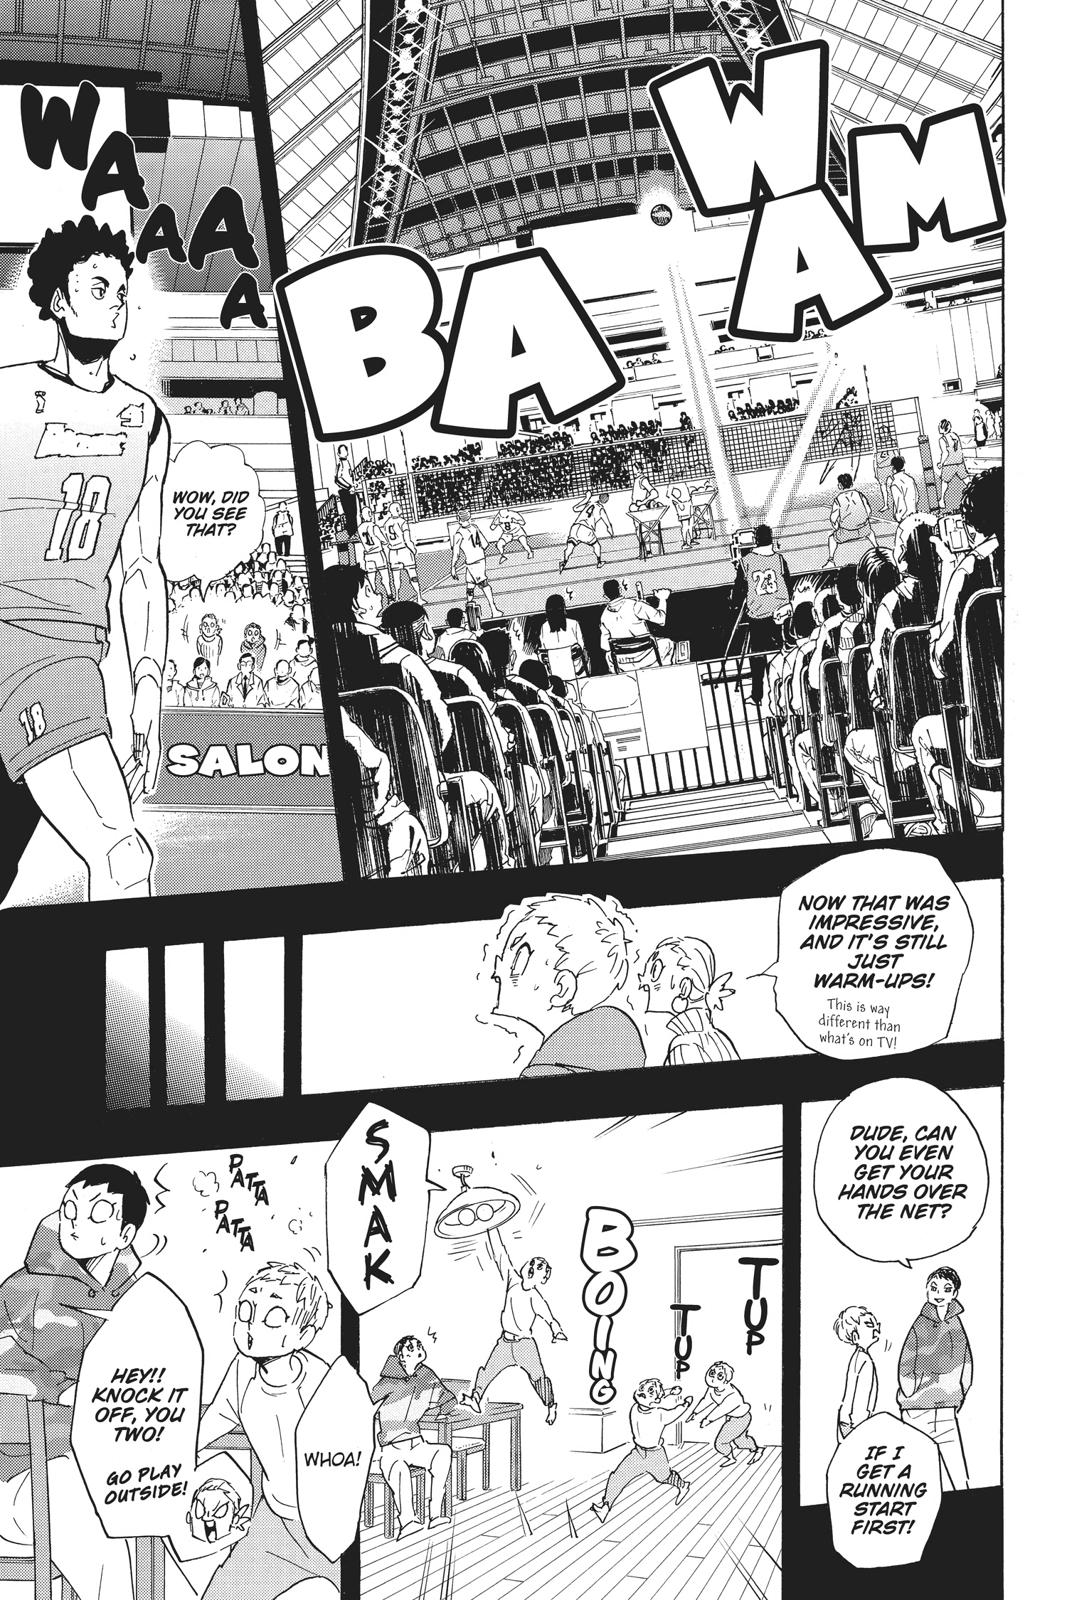  Chapter 343 image 010